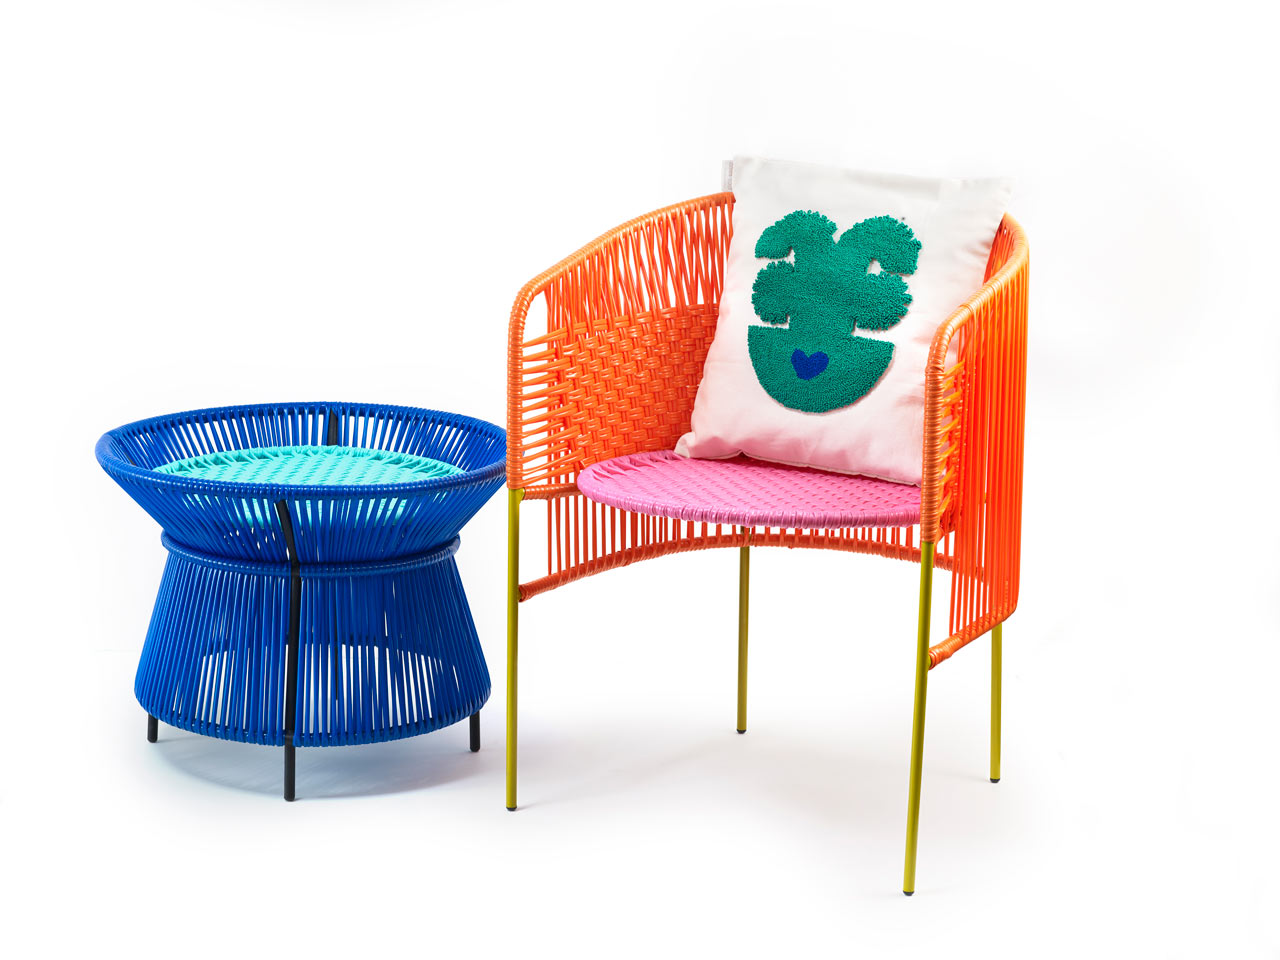 ames Launches CARIBE, a Colorful Outdoor Collection Made of Recycled Plastic-0